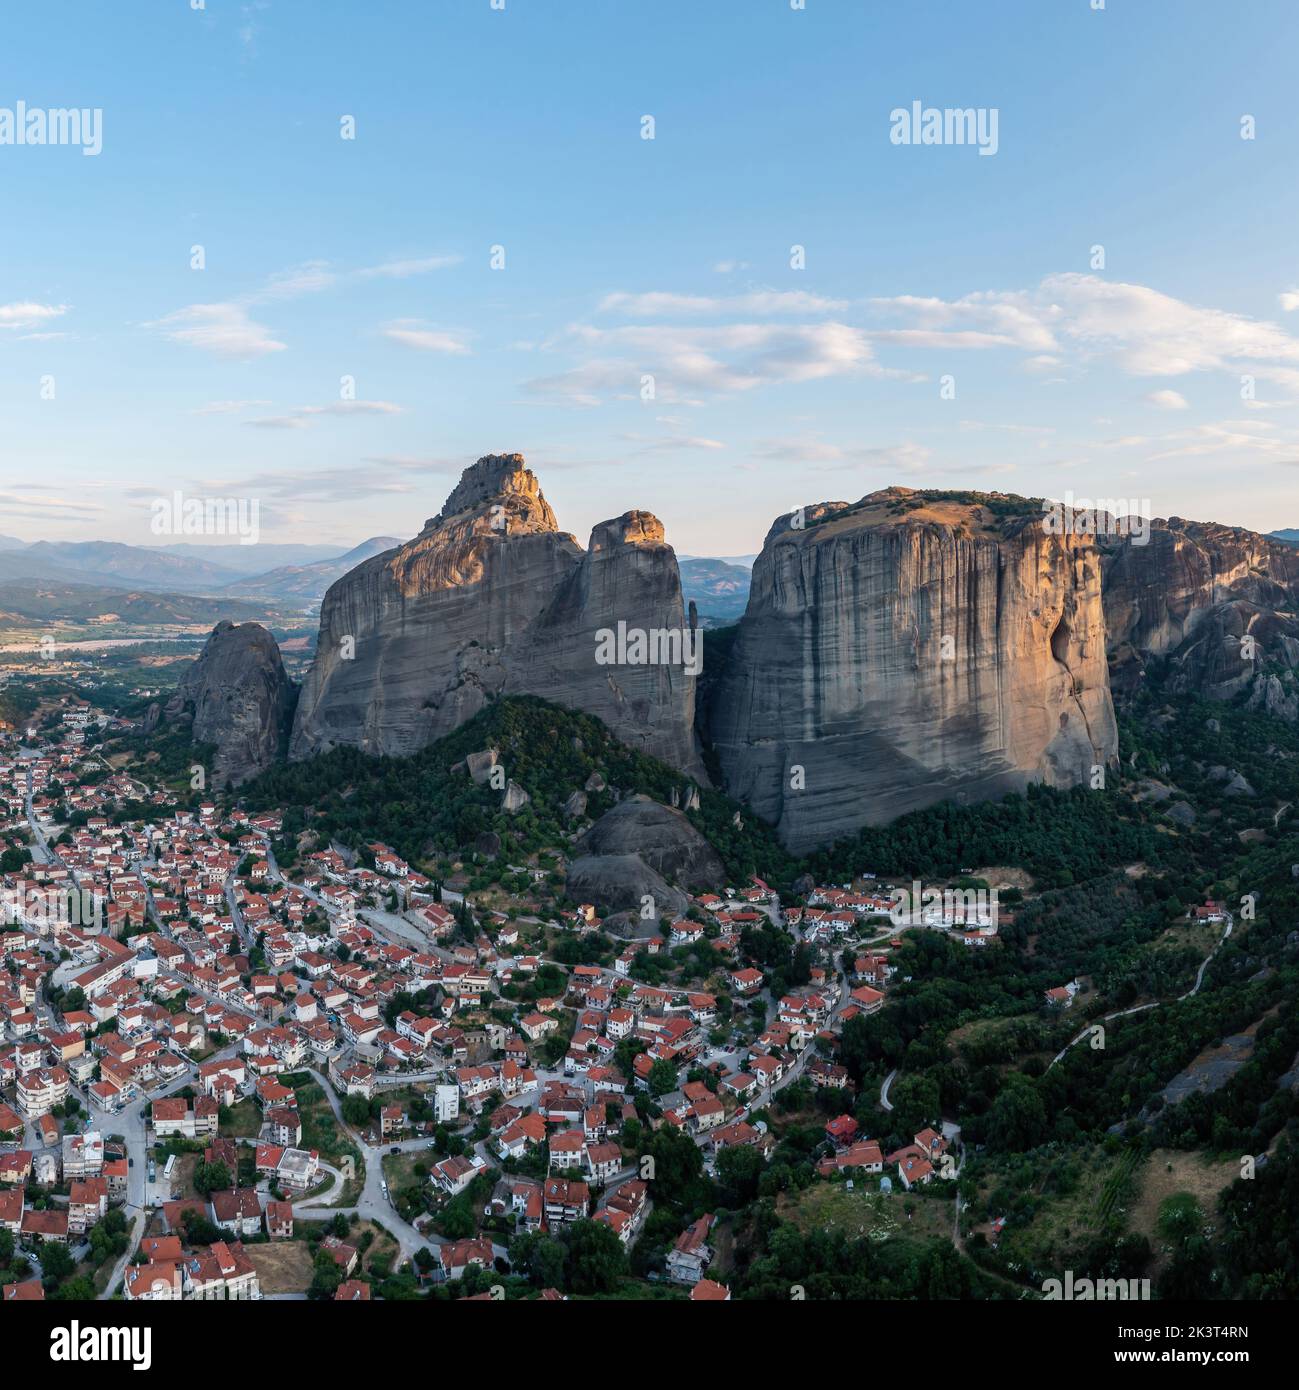 Meteora Greece at sunrise, Blue sky with clouds over Monastery buildings on top of rocks and Kalambaka town and valley. Europe travel destination Stock Photo